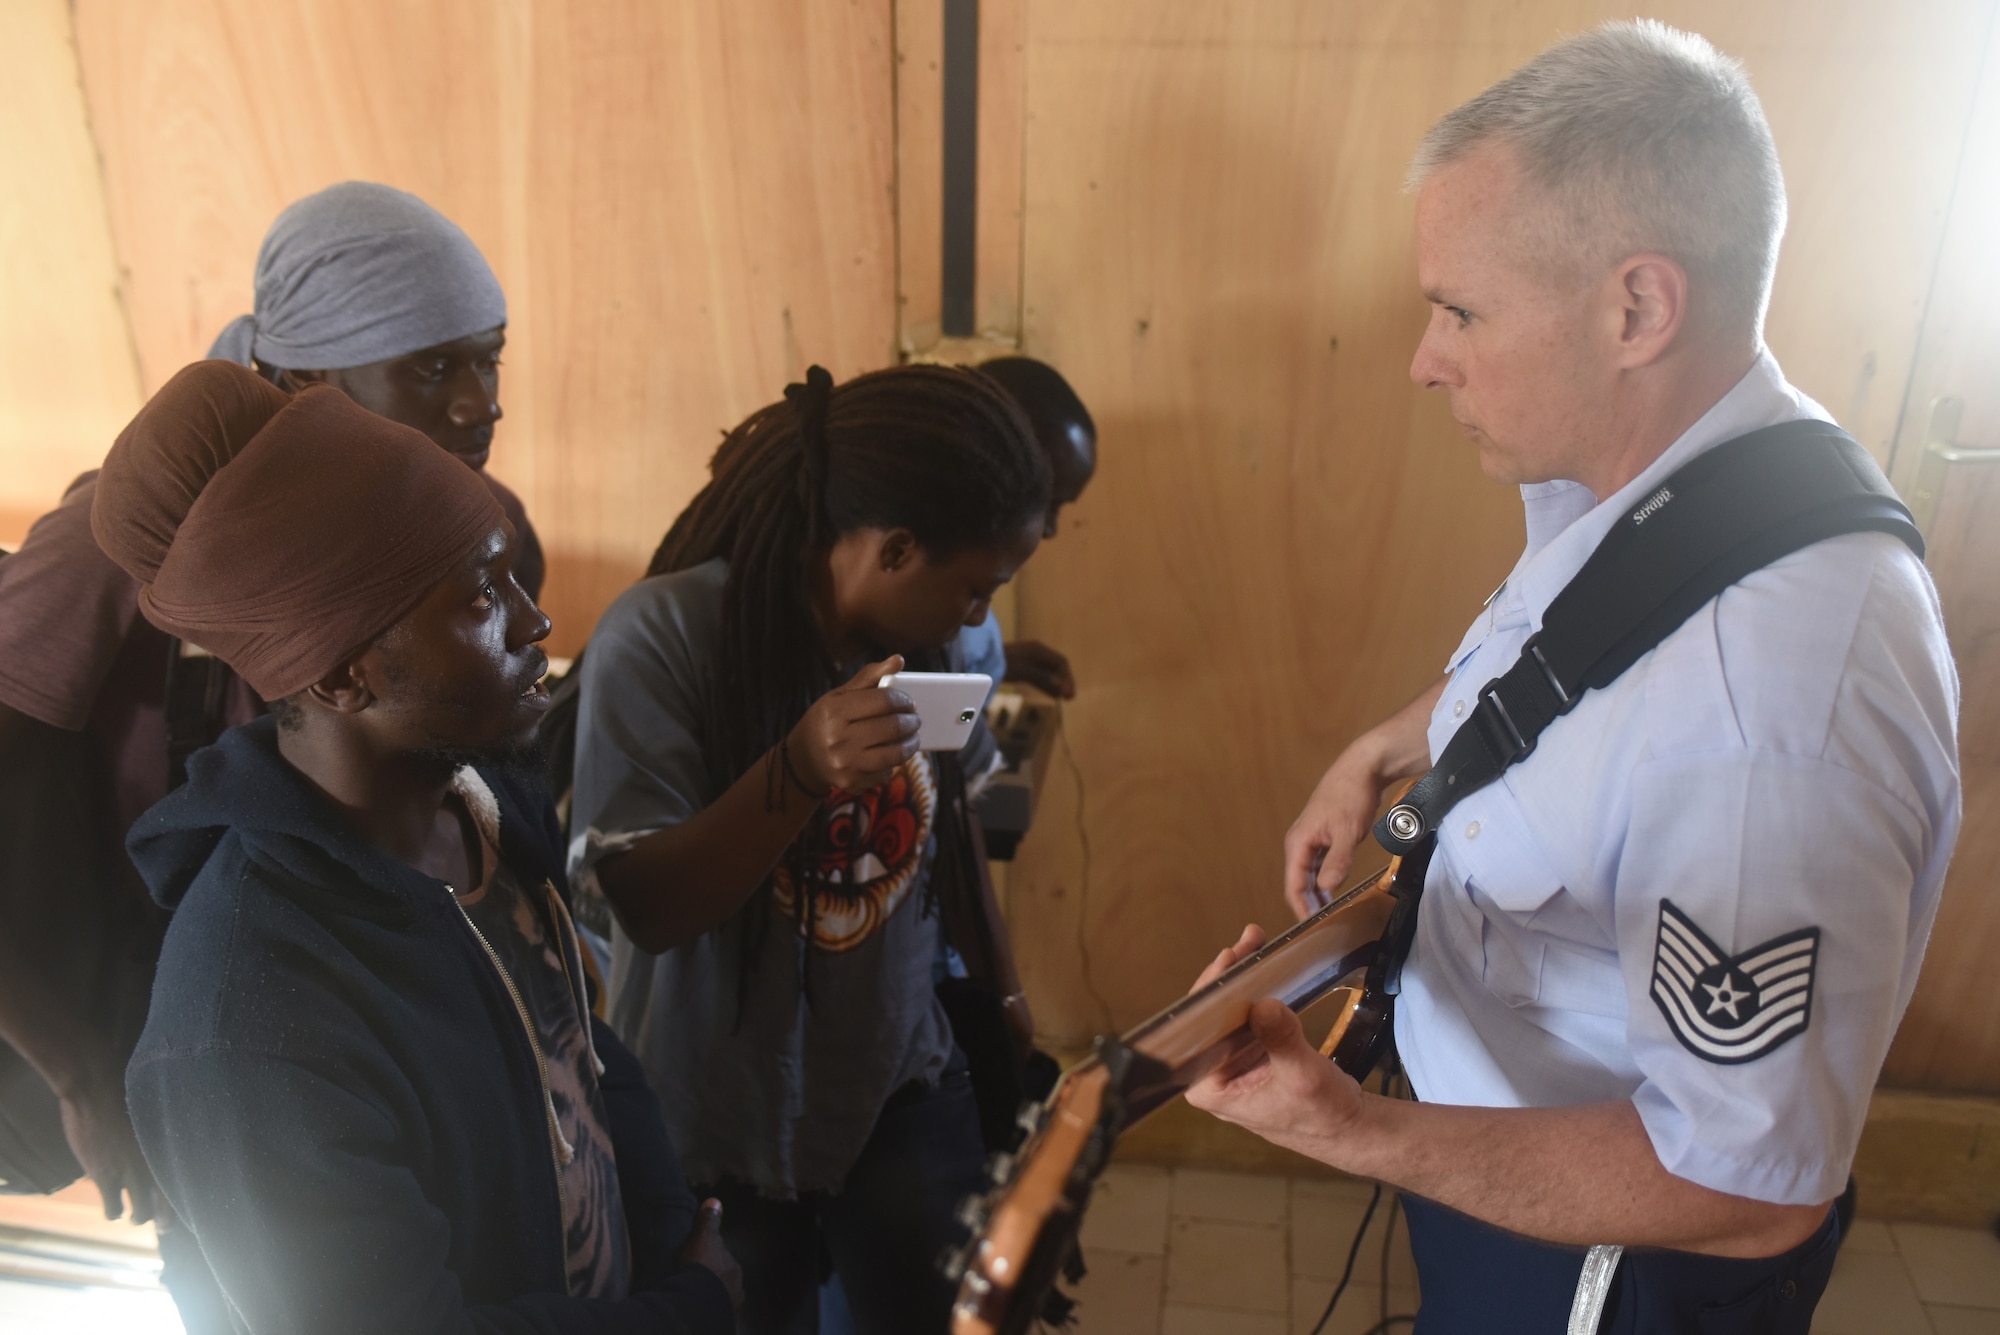 Tech. Sgt. Joseph Whitt teaches students bass guitar techniques at the National School of the Arts in Dakar, Senegal, March 21, 2018. The USAFE Band assists in building relationships through community engagement and outreach. (U.S. Air Force photo by Airman 1st Class Eli Chevalier)